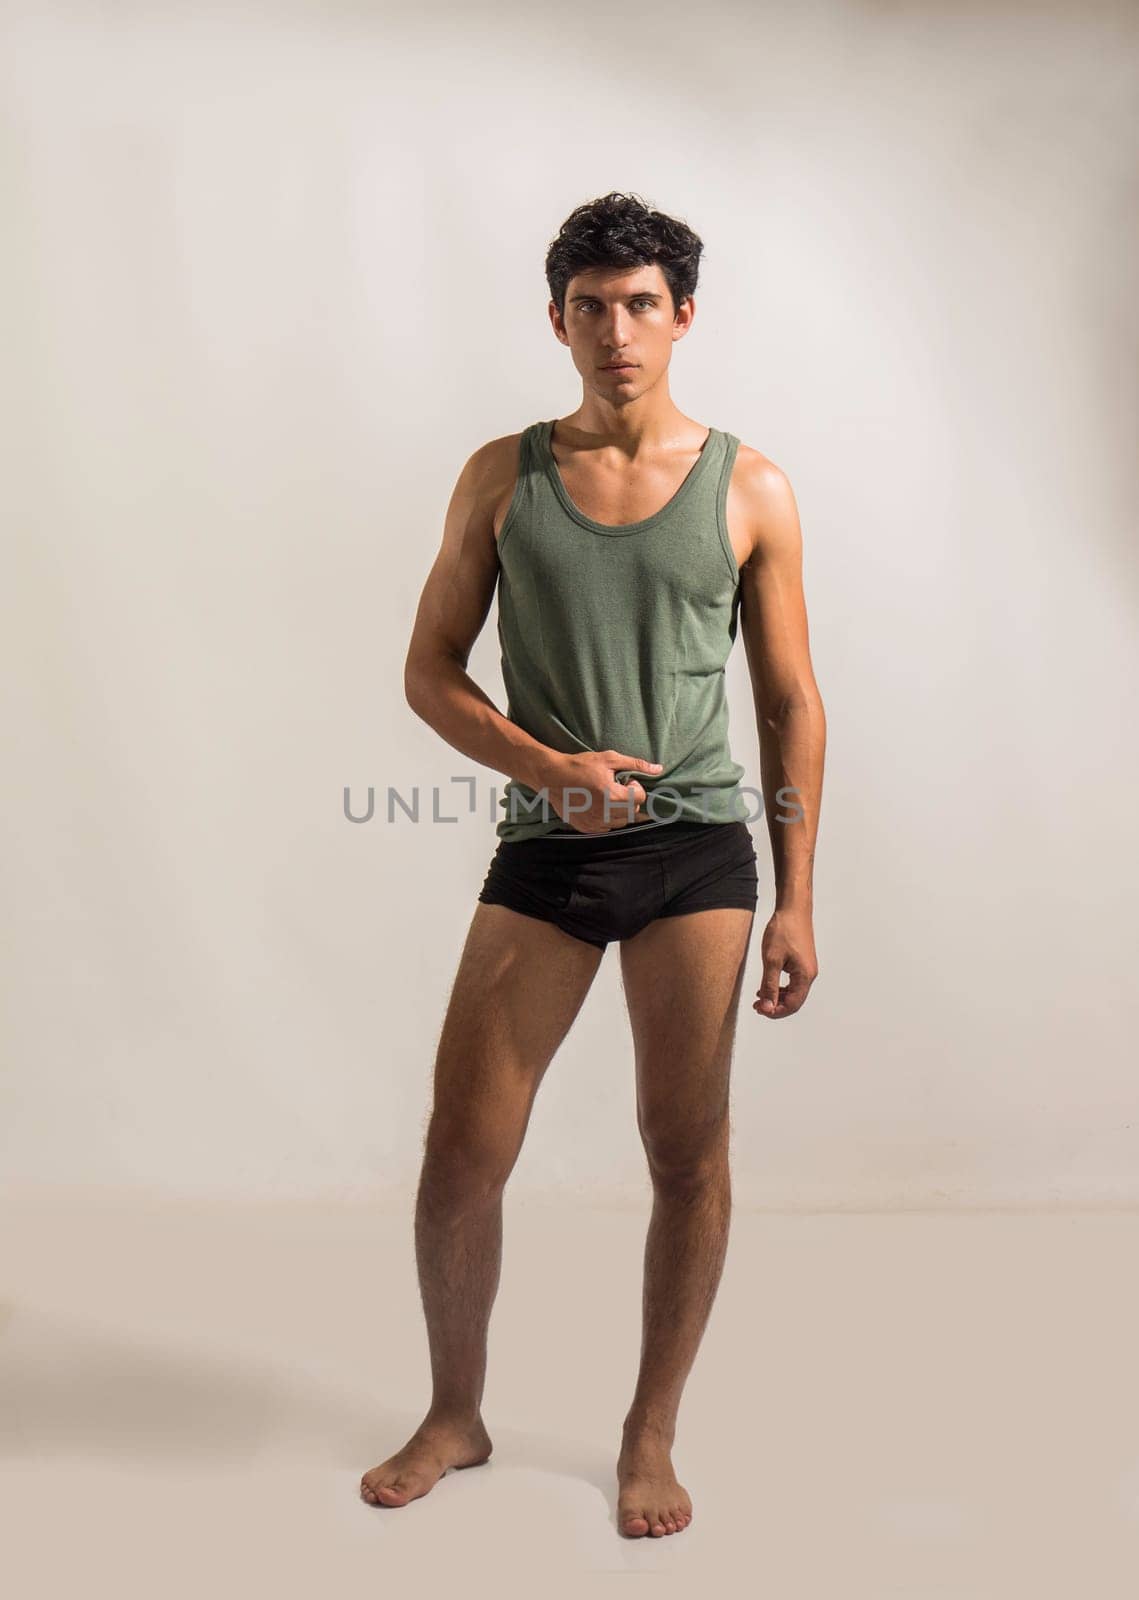 Full body view of fit and attractive young man in underwear on grey background. Wearing tank-top and looking at camera. Athletic fit physique